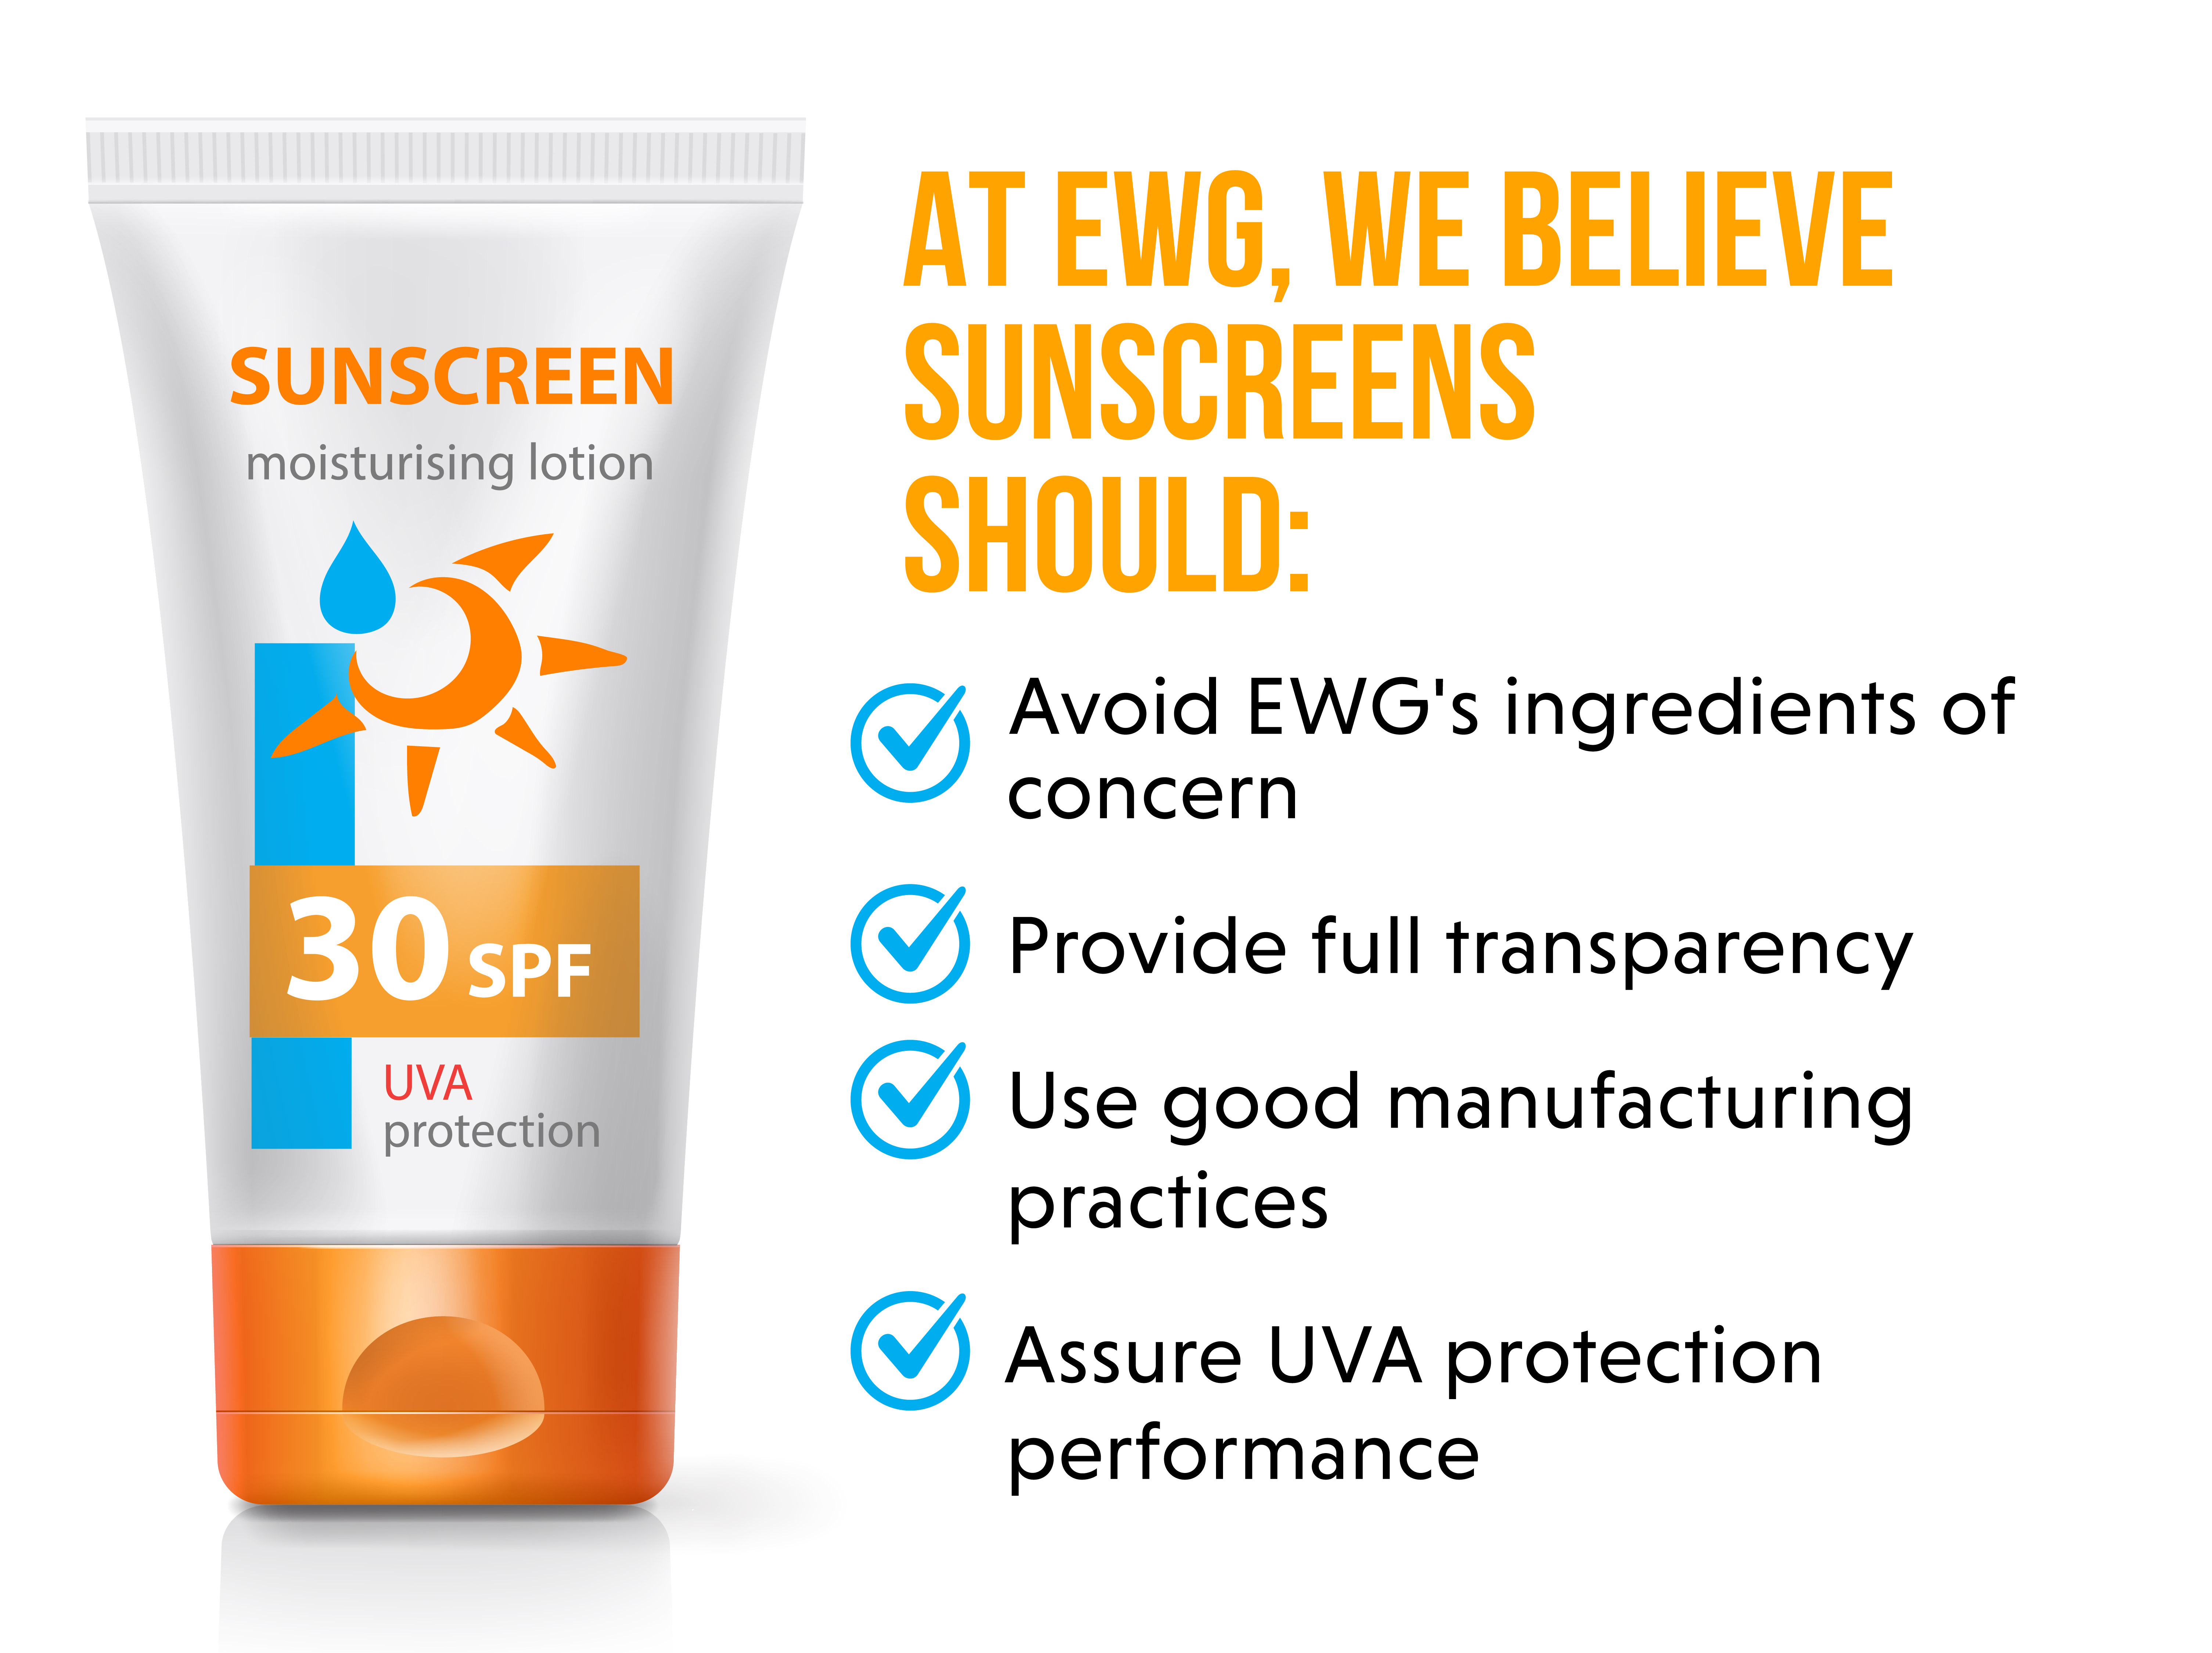 EWG's 17th annual guide to sunscreen